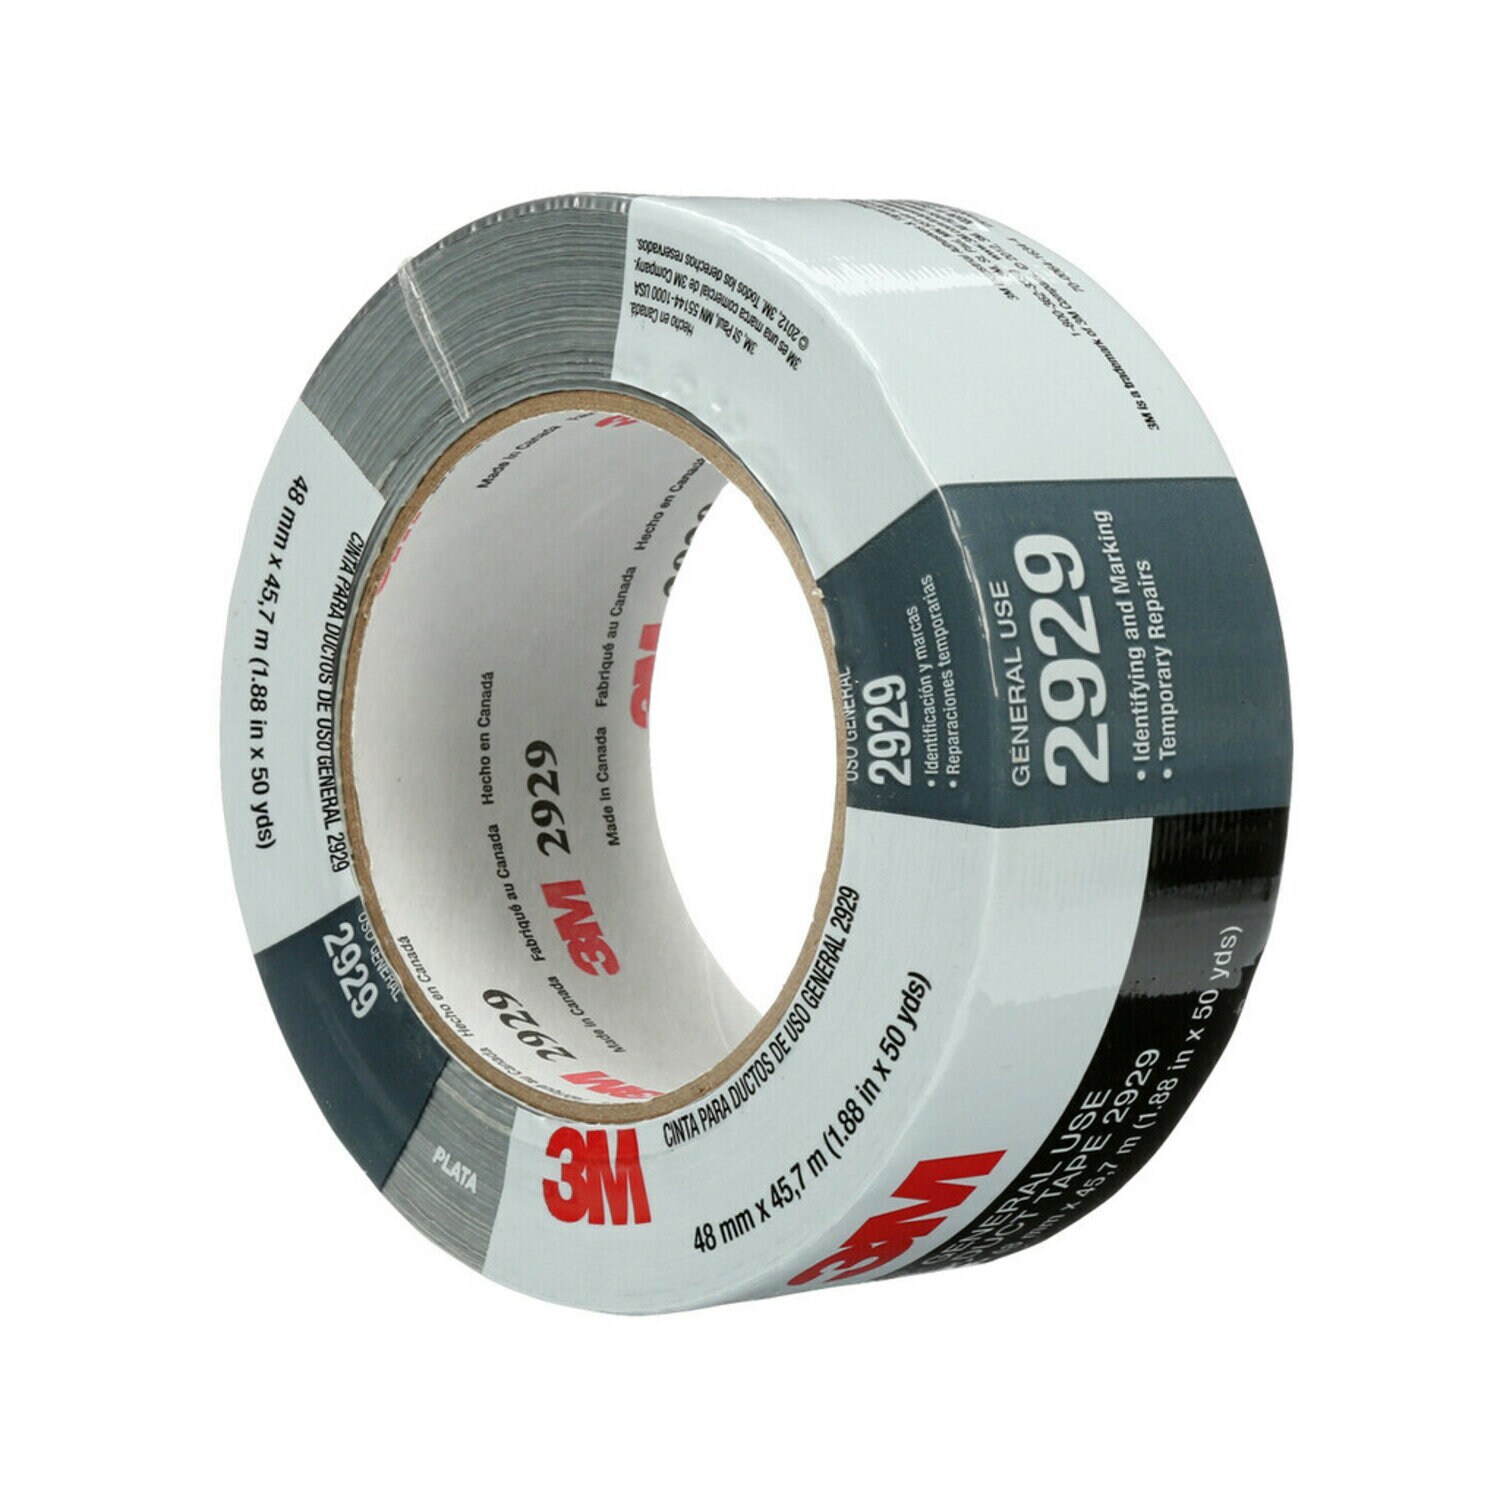 7000029030 - 3M General Use Duct Tape 2929, Silver, 1.88 in x 50 yd, 5.5 mil, 24
Roll/Case, Individually Wrapped Conveniently Packaged